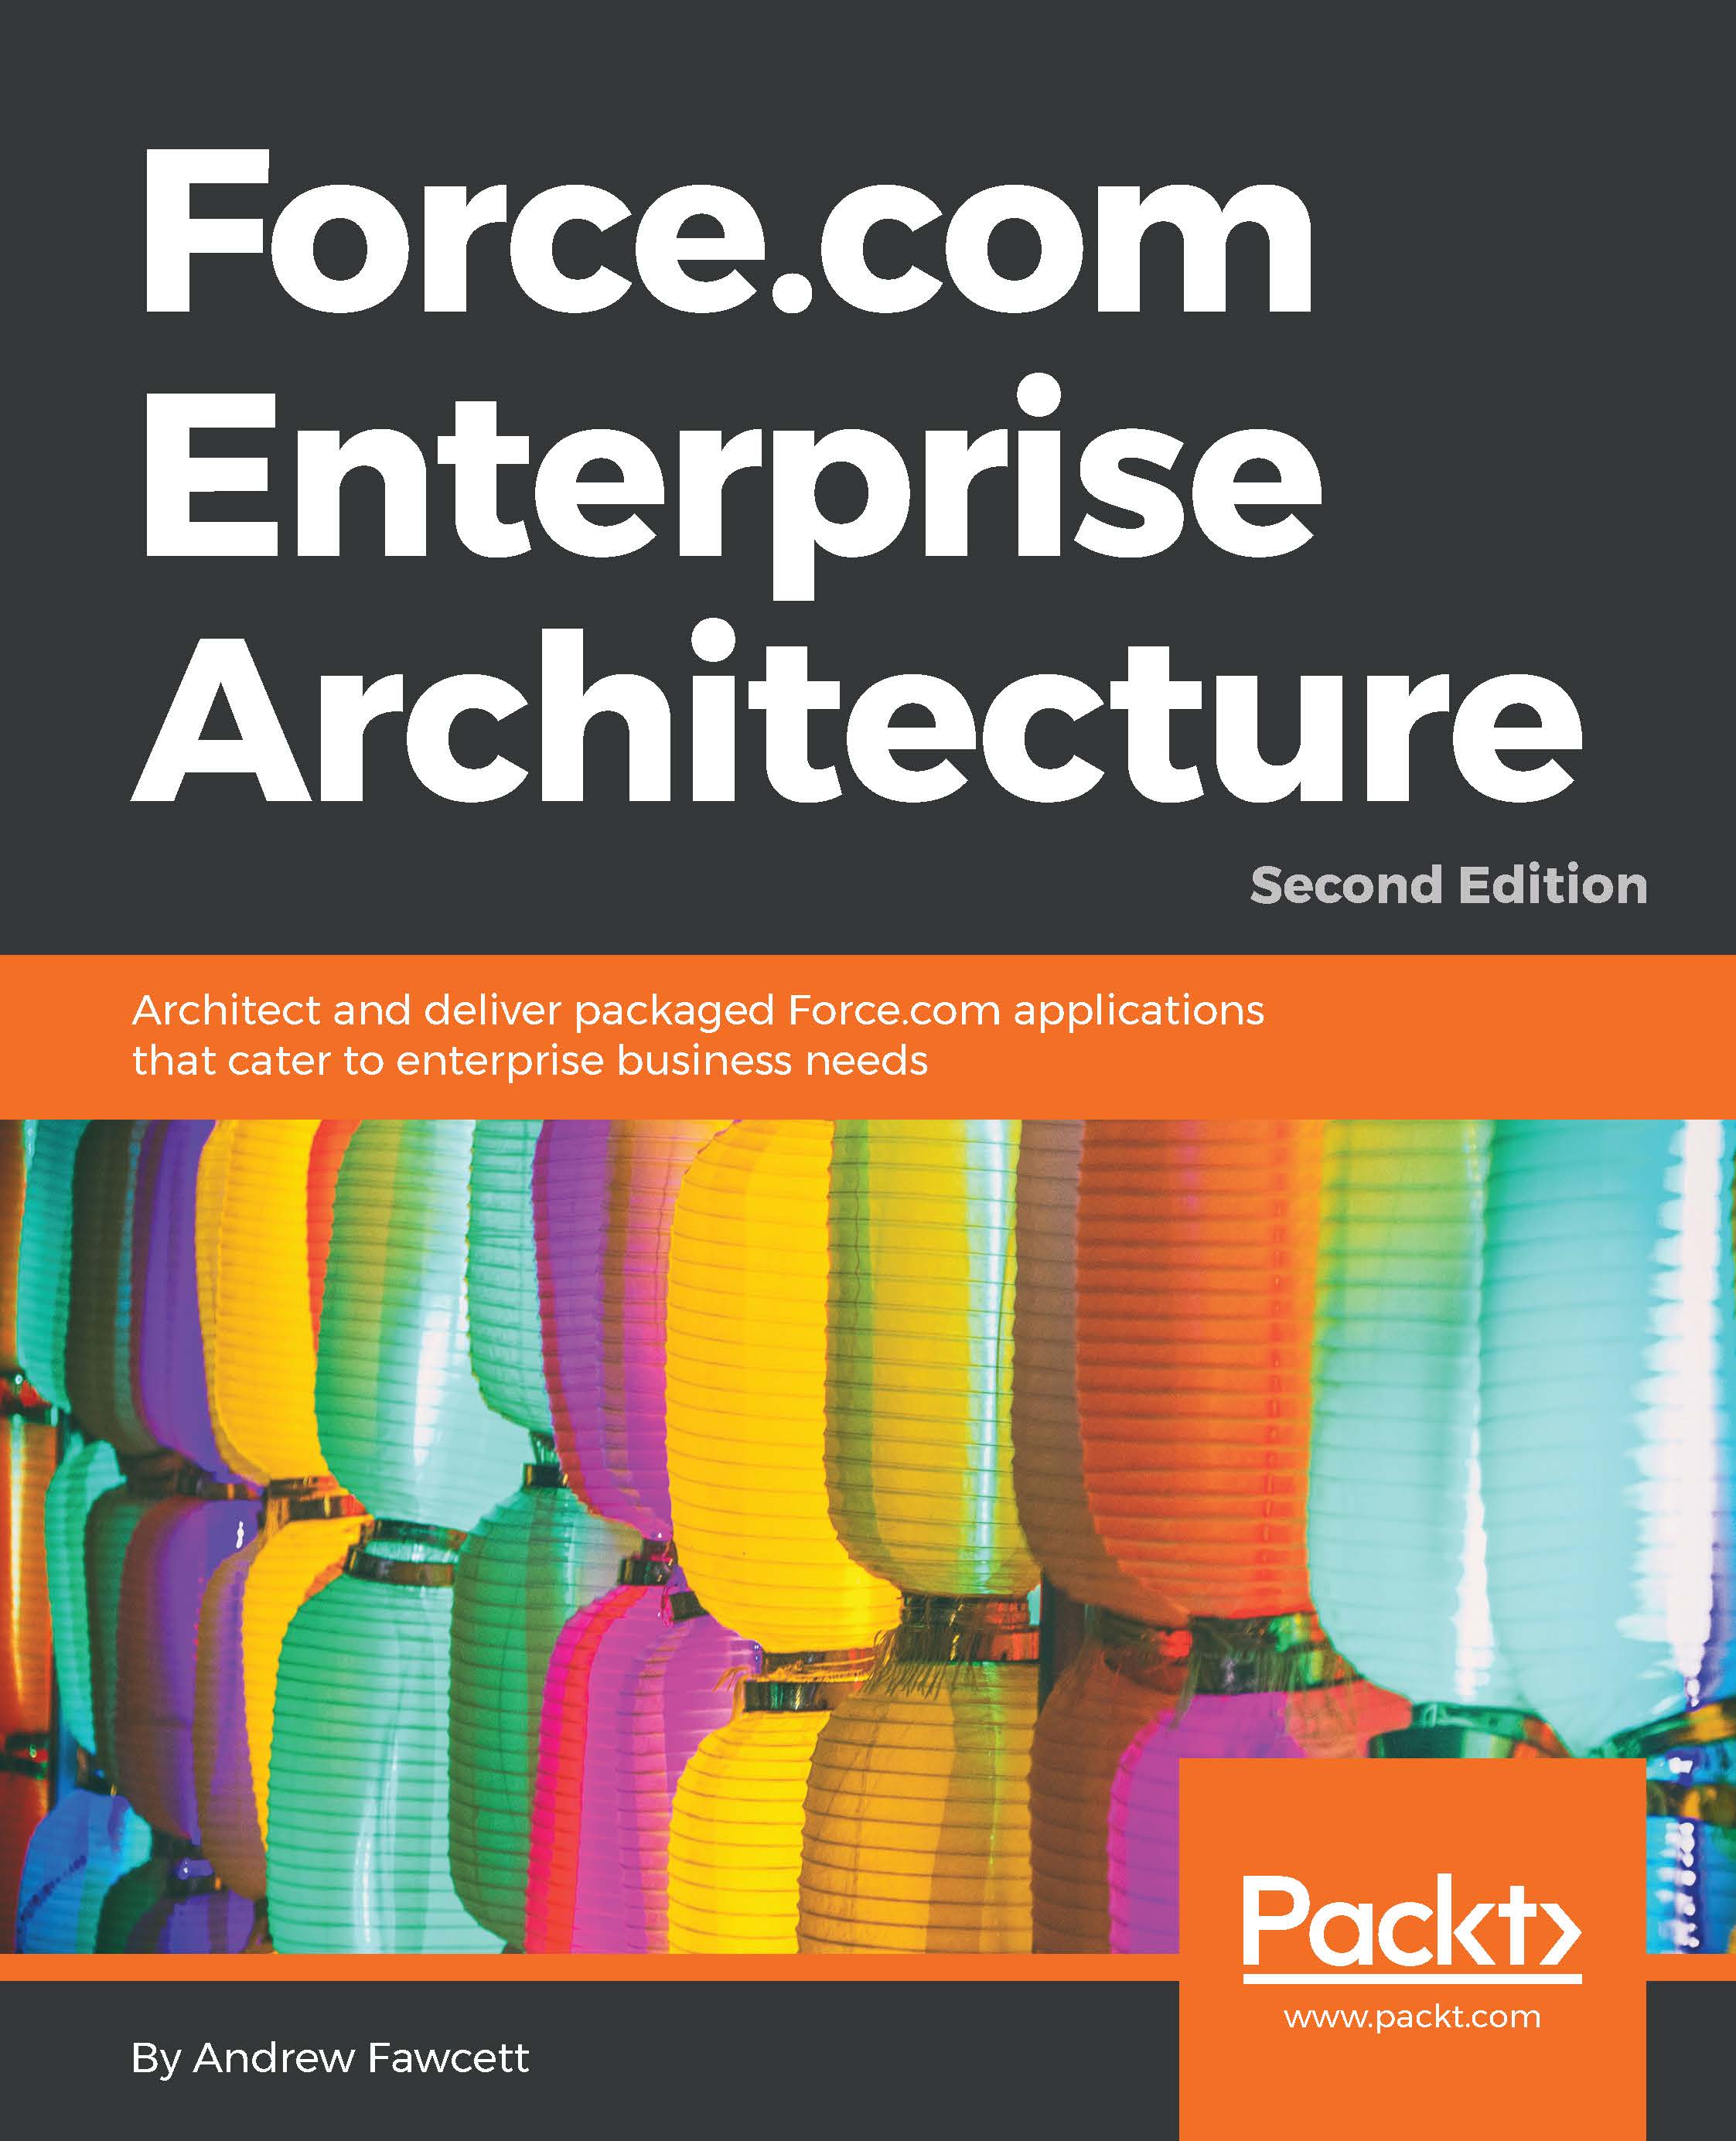 Force.com Enterprise Architecture: Architect and deliver packaged Force.com applications that cater to enterprise business needs, Second Edition